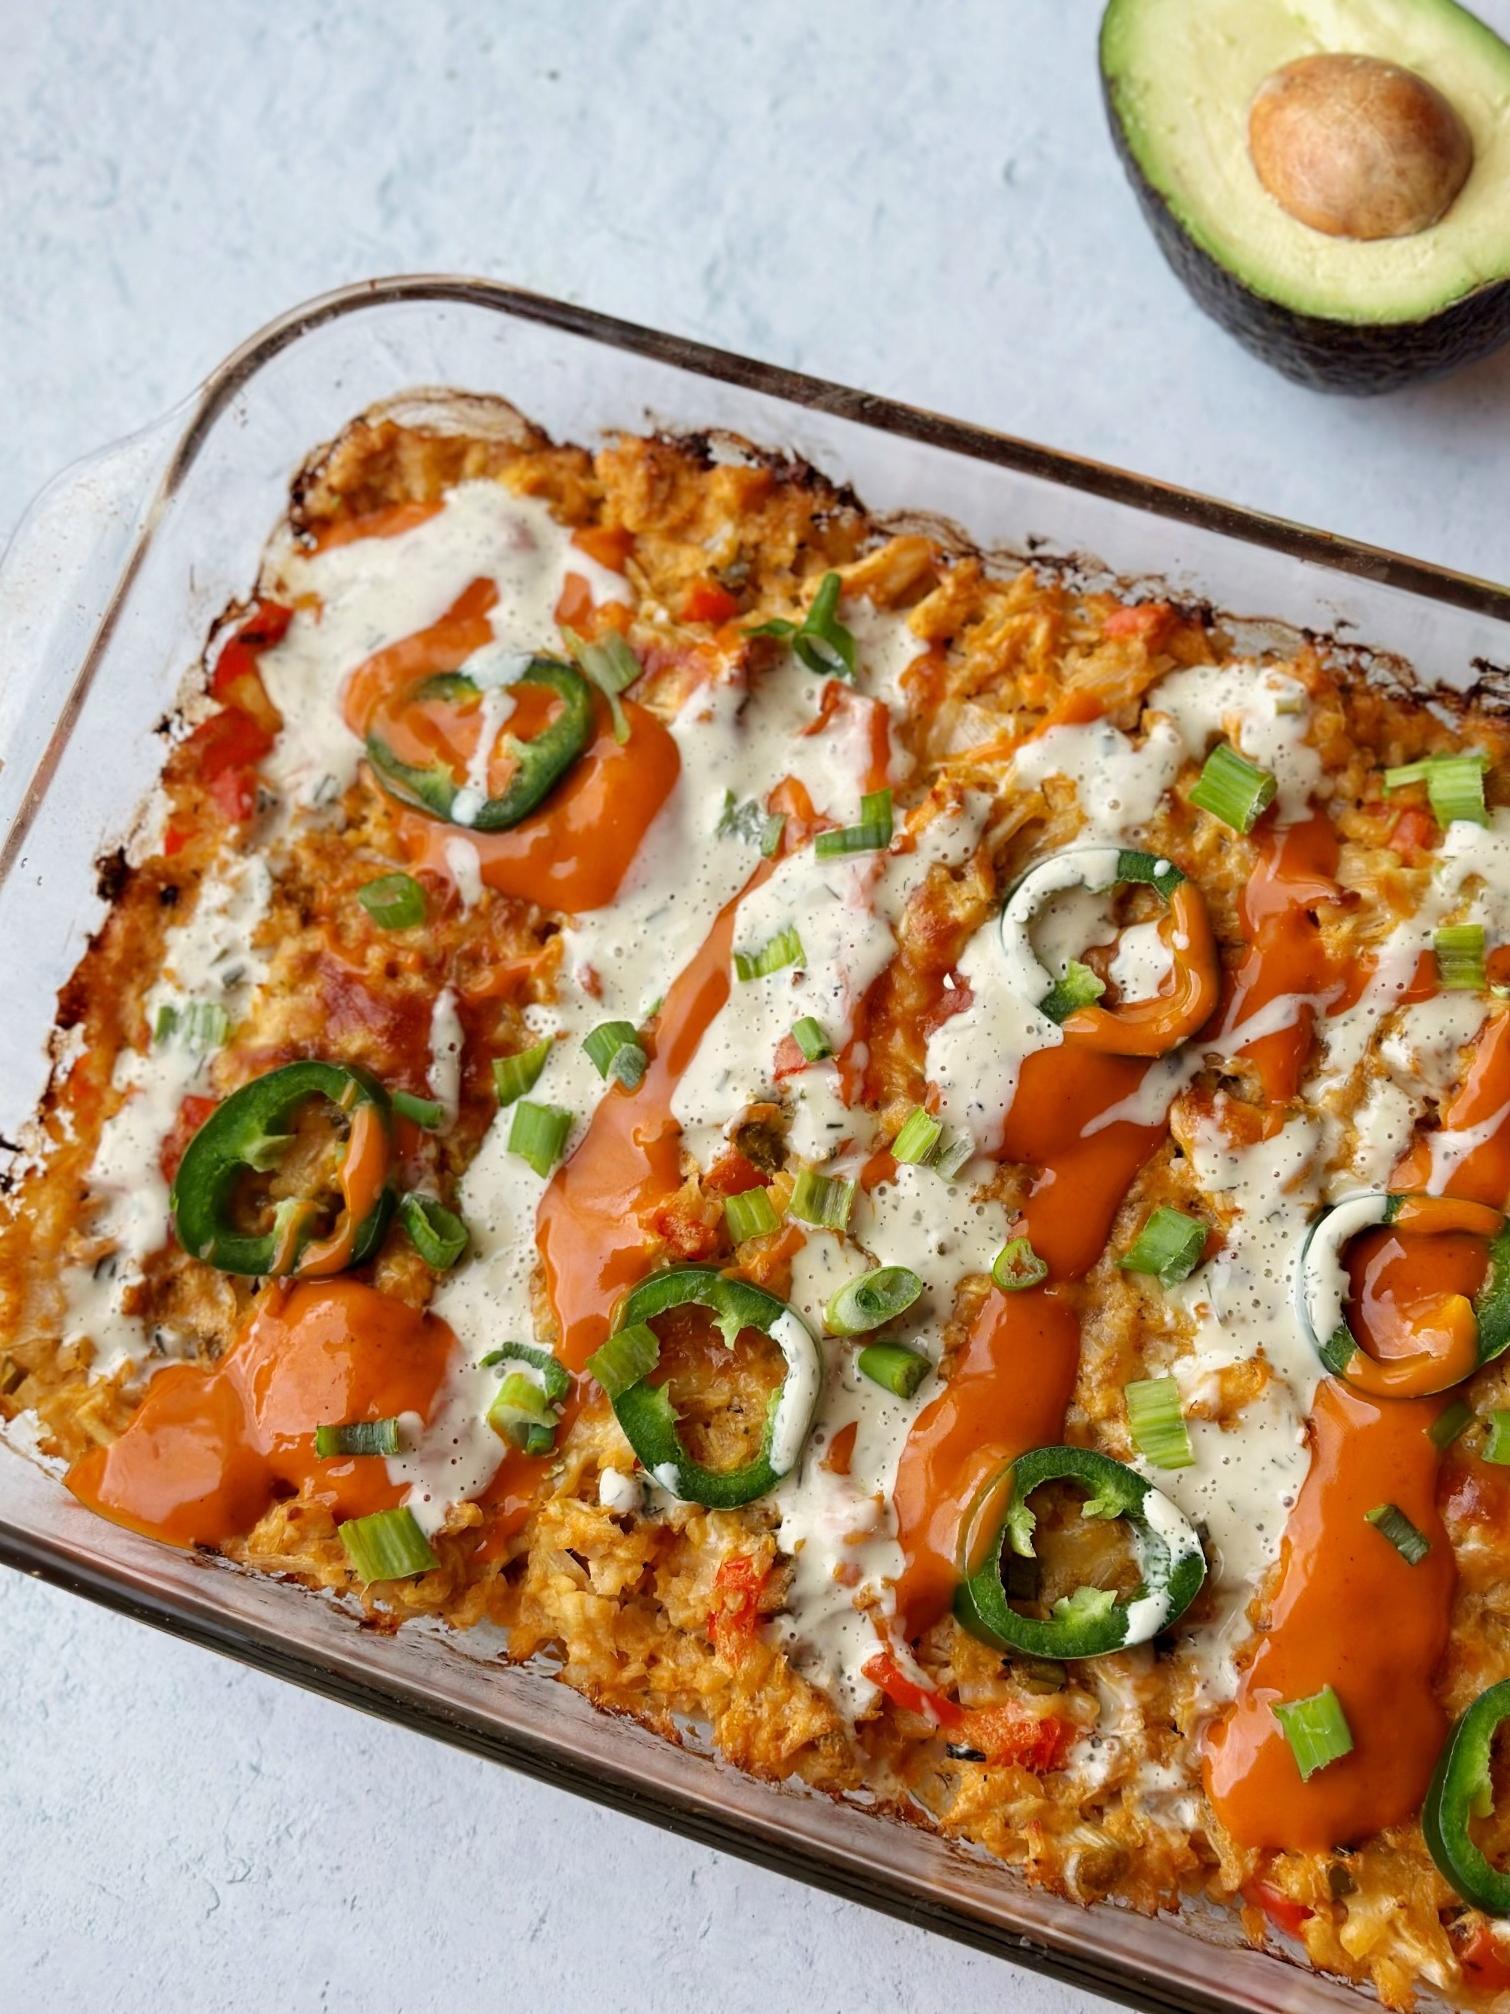  Perfect for a crowd or your next weeknight dinner - this casserole has got it all!